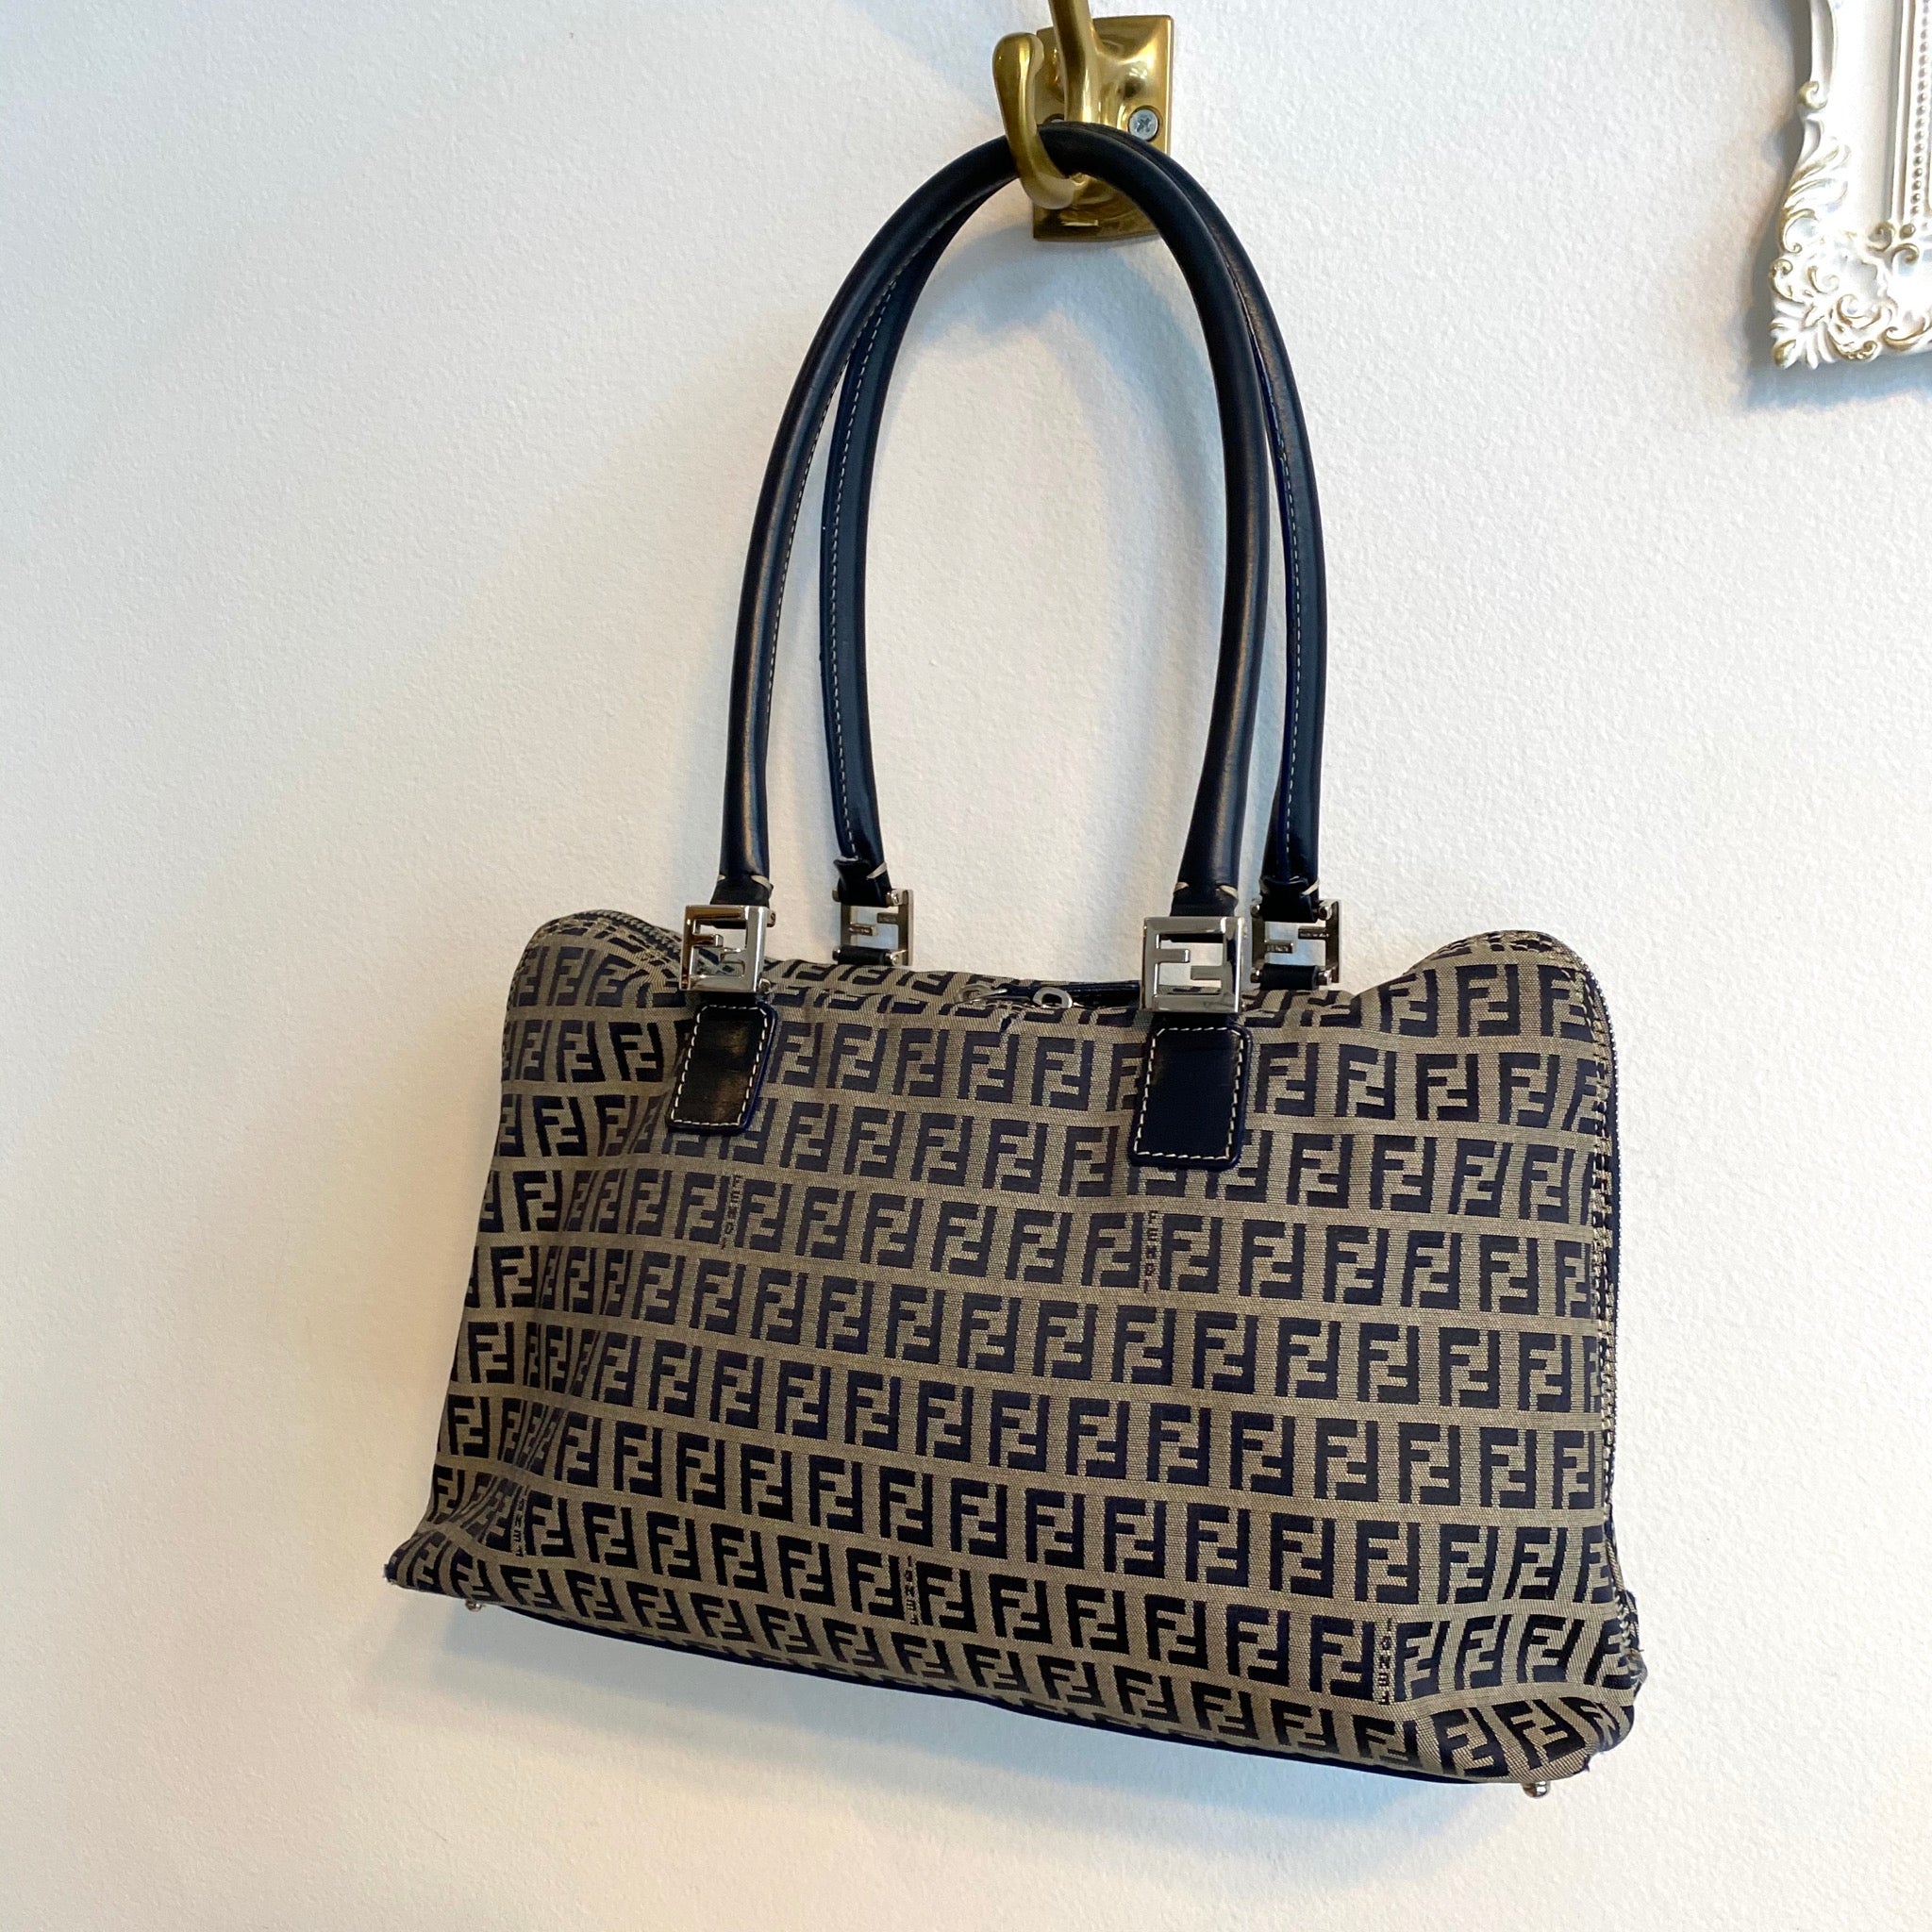 How To Authenticate Vintage Fendi Bag | IUCN Water